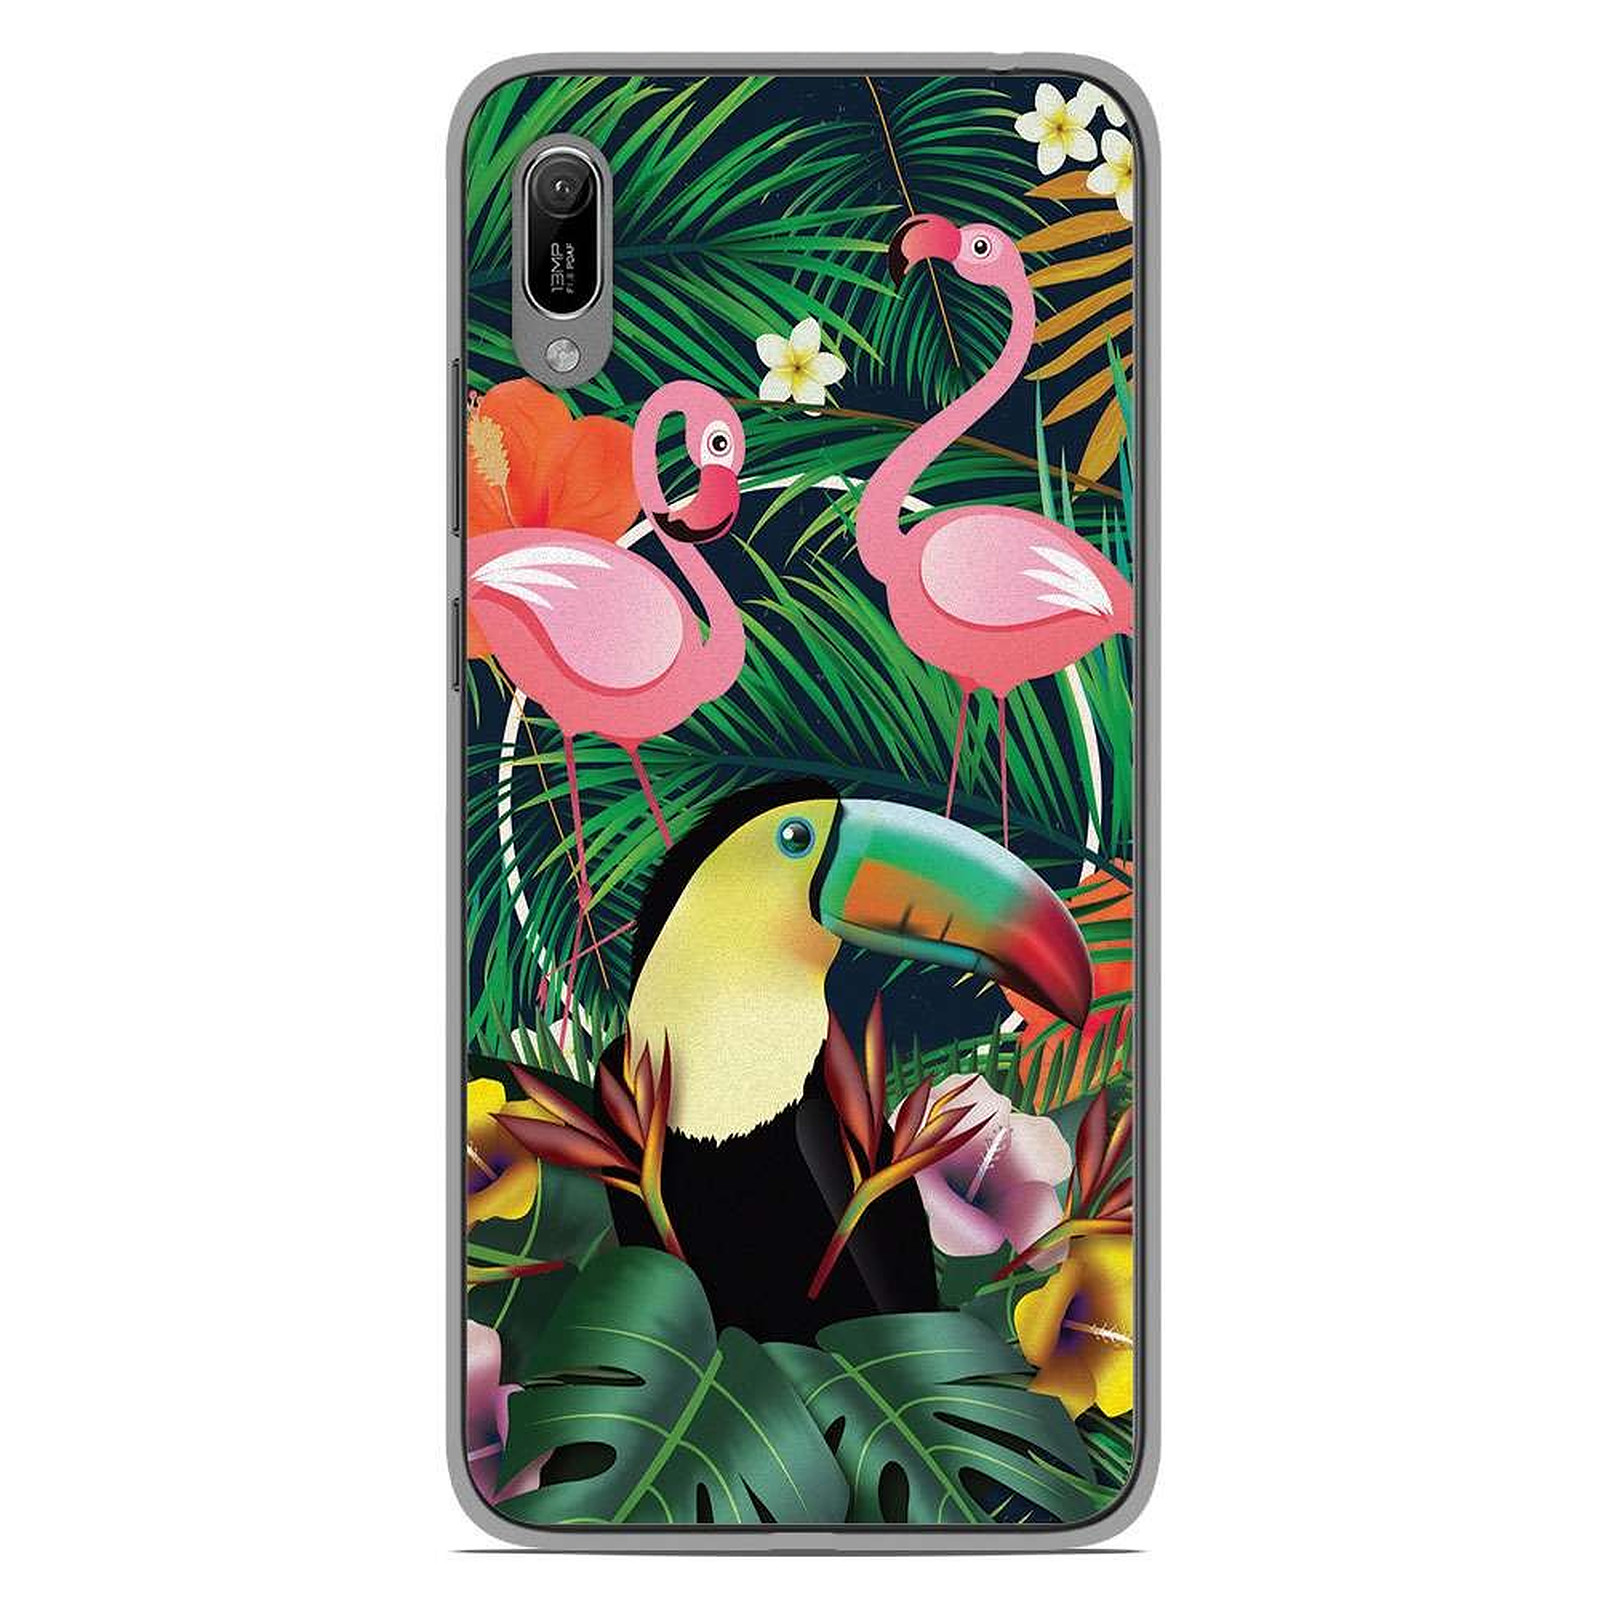 1001 Coques Coque silicone gel Huawei Y6 2019 motif Tropical Toucan - Coque telephone 1001Coques